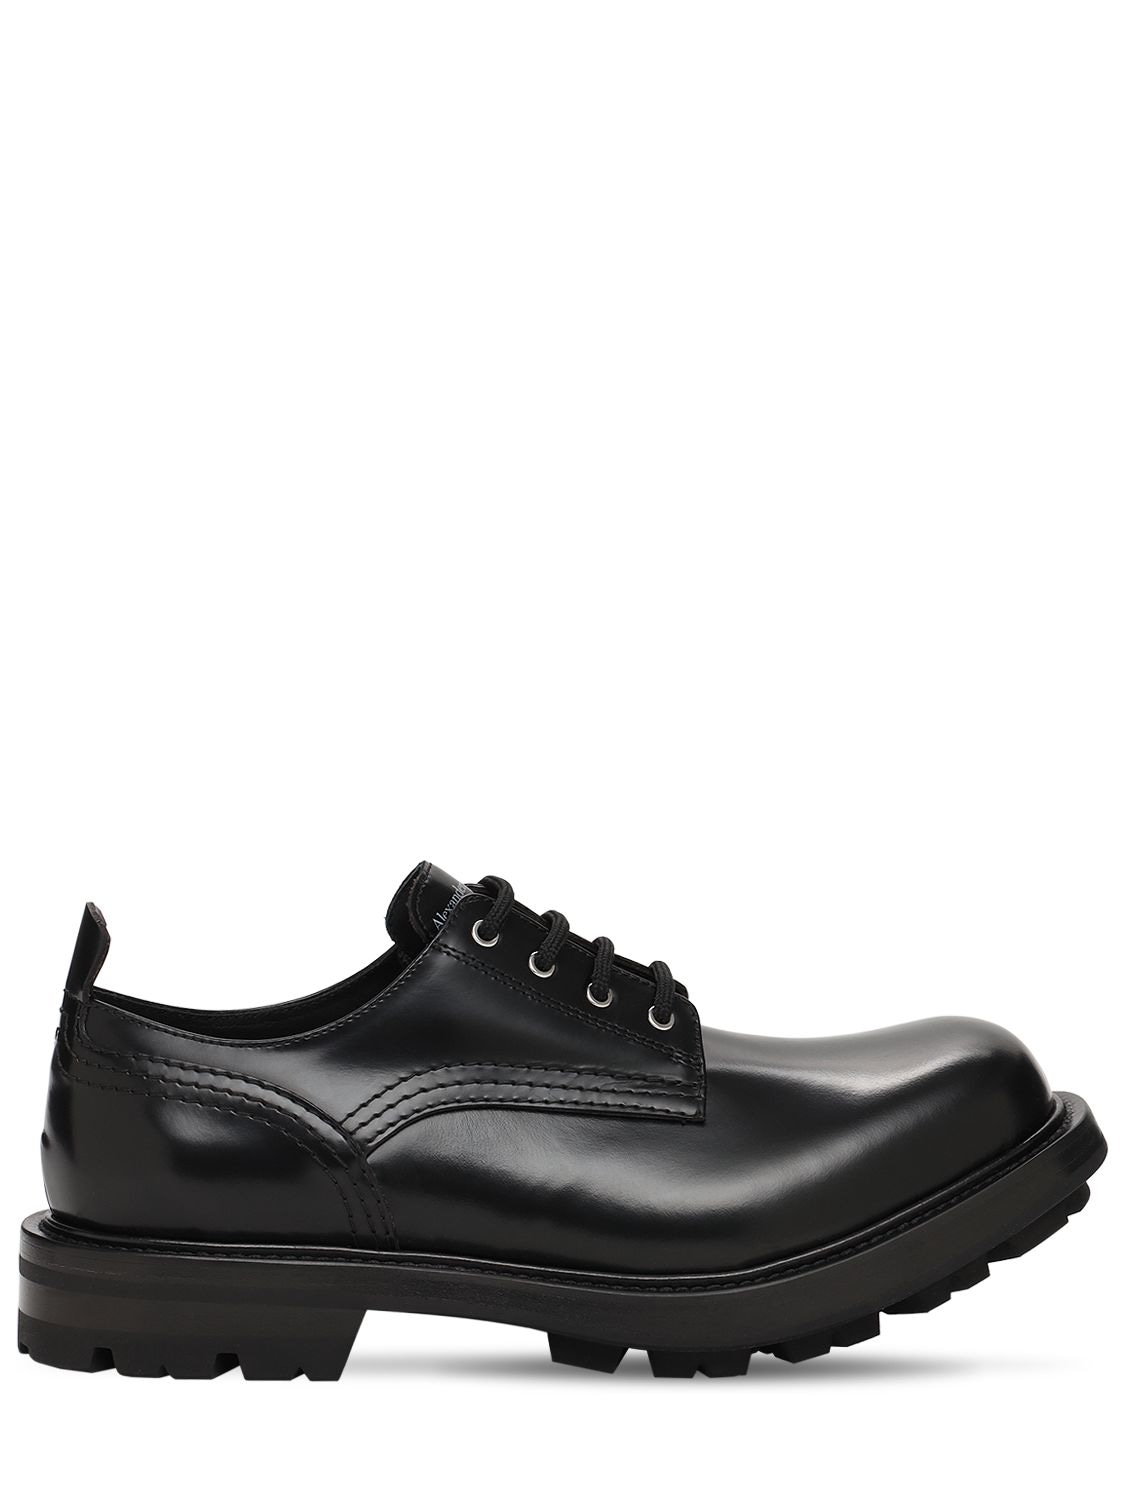 ALEXANDER MCQUEEN PATENT LEATHER LACE-UP SHOES,73I1UQ004-MTAWMA2